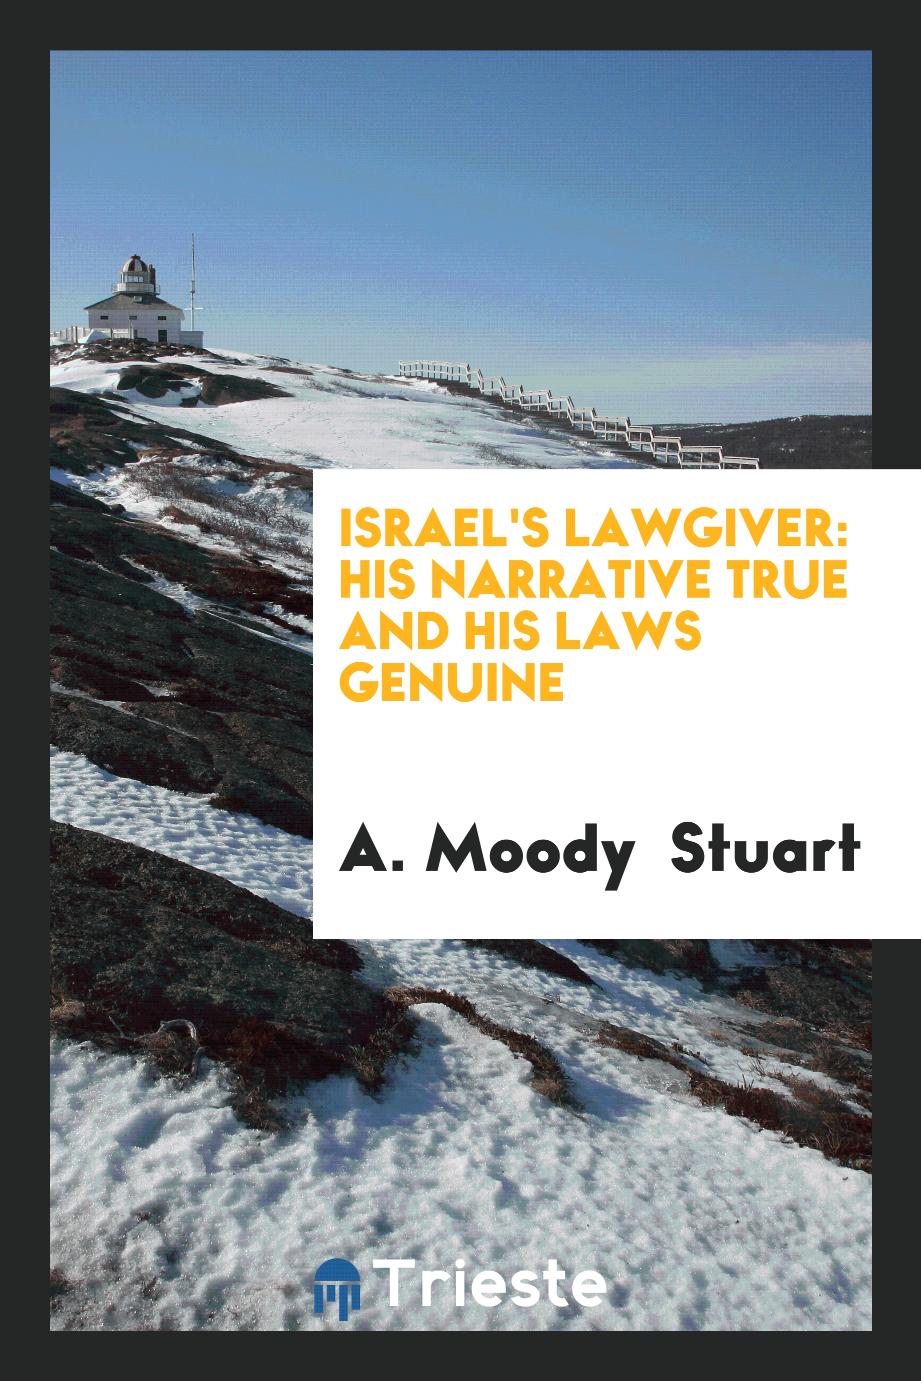 Israel's Lawgiver: His Narrative True and His Laws Genuine